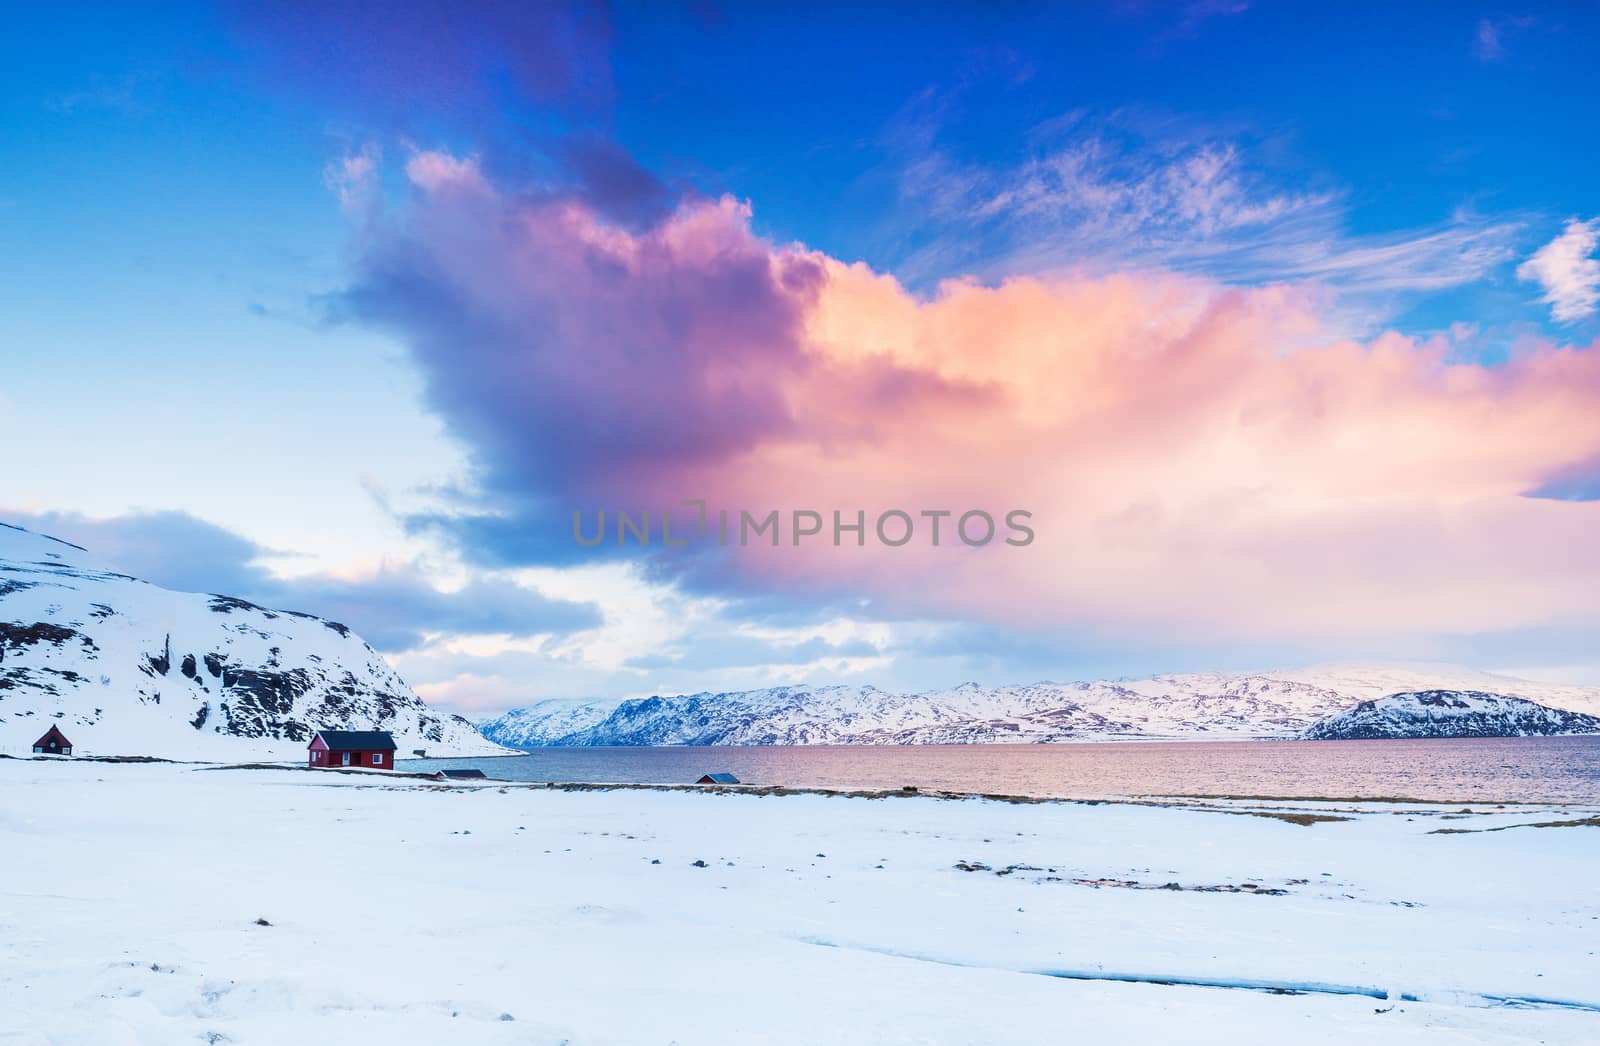 Winter in Norway - Sunset in mountains with red house and the ocean. Panorama